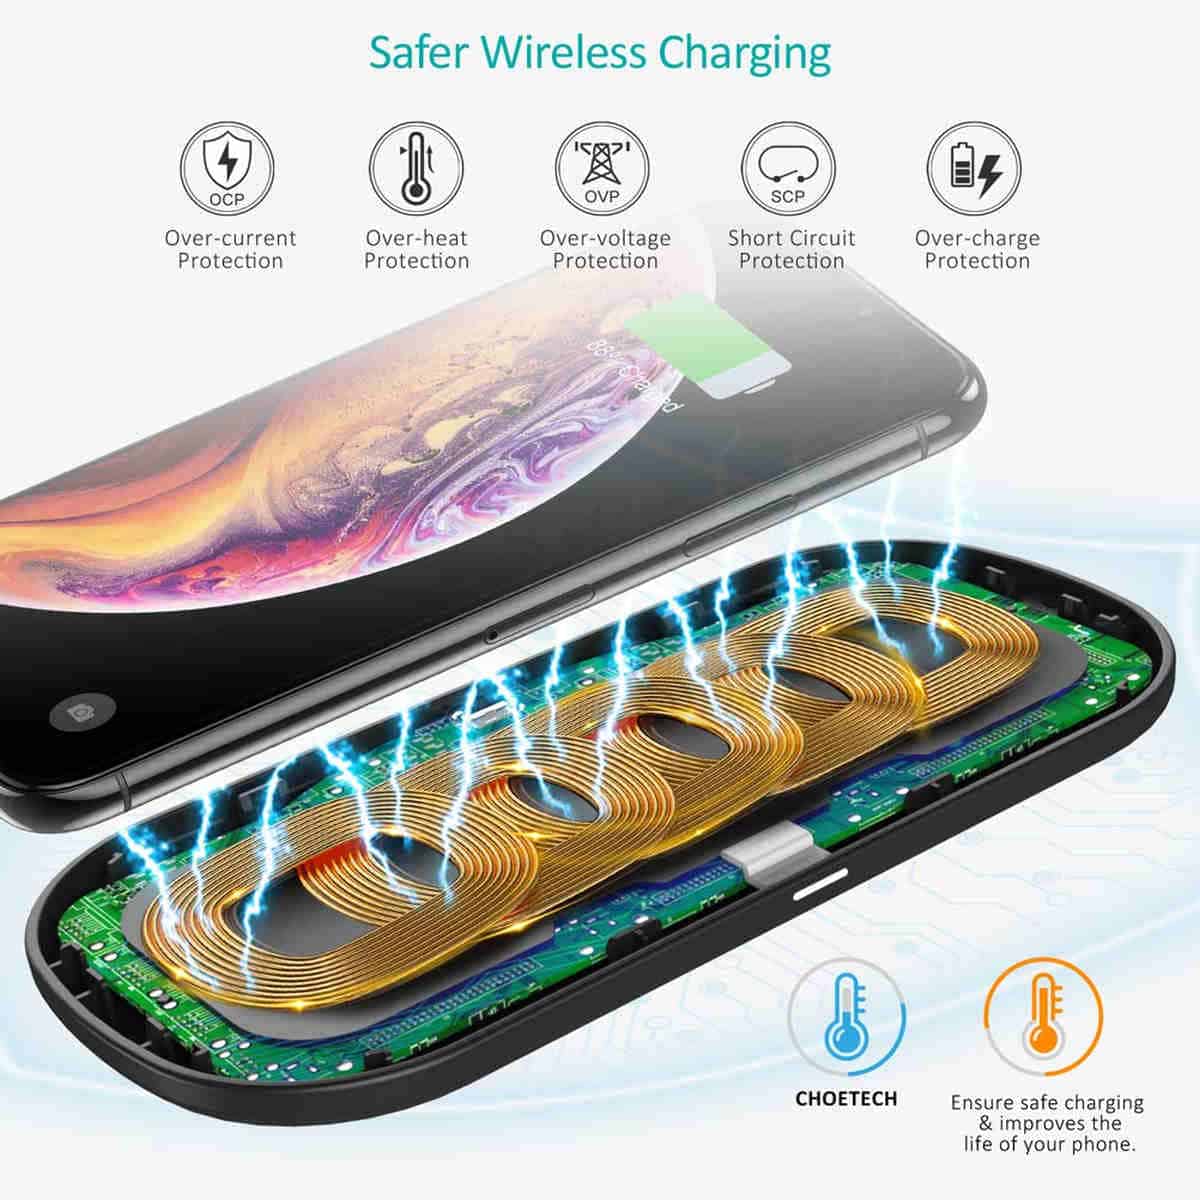 CHOETECH-Wireless-Charger Safer wireless charging | CHOETECH Qi Fast Dual Wireless Charging Pad | Product Review